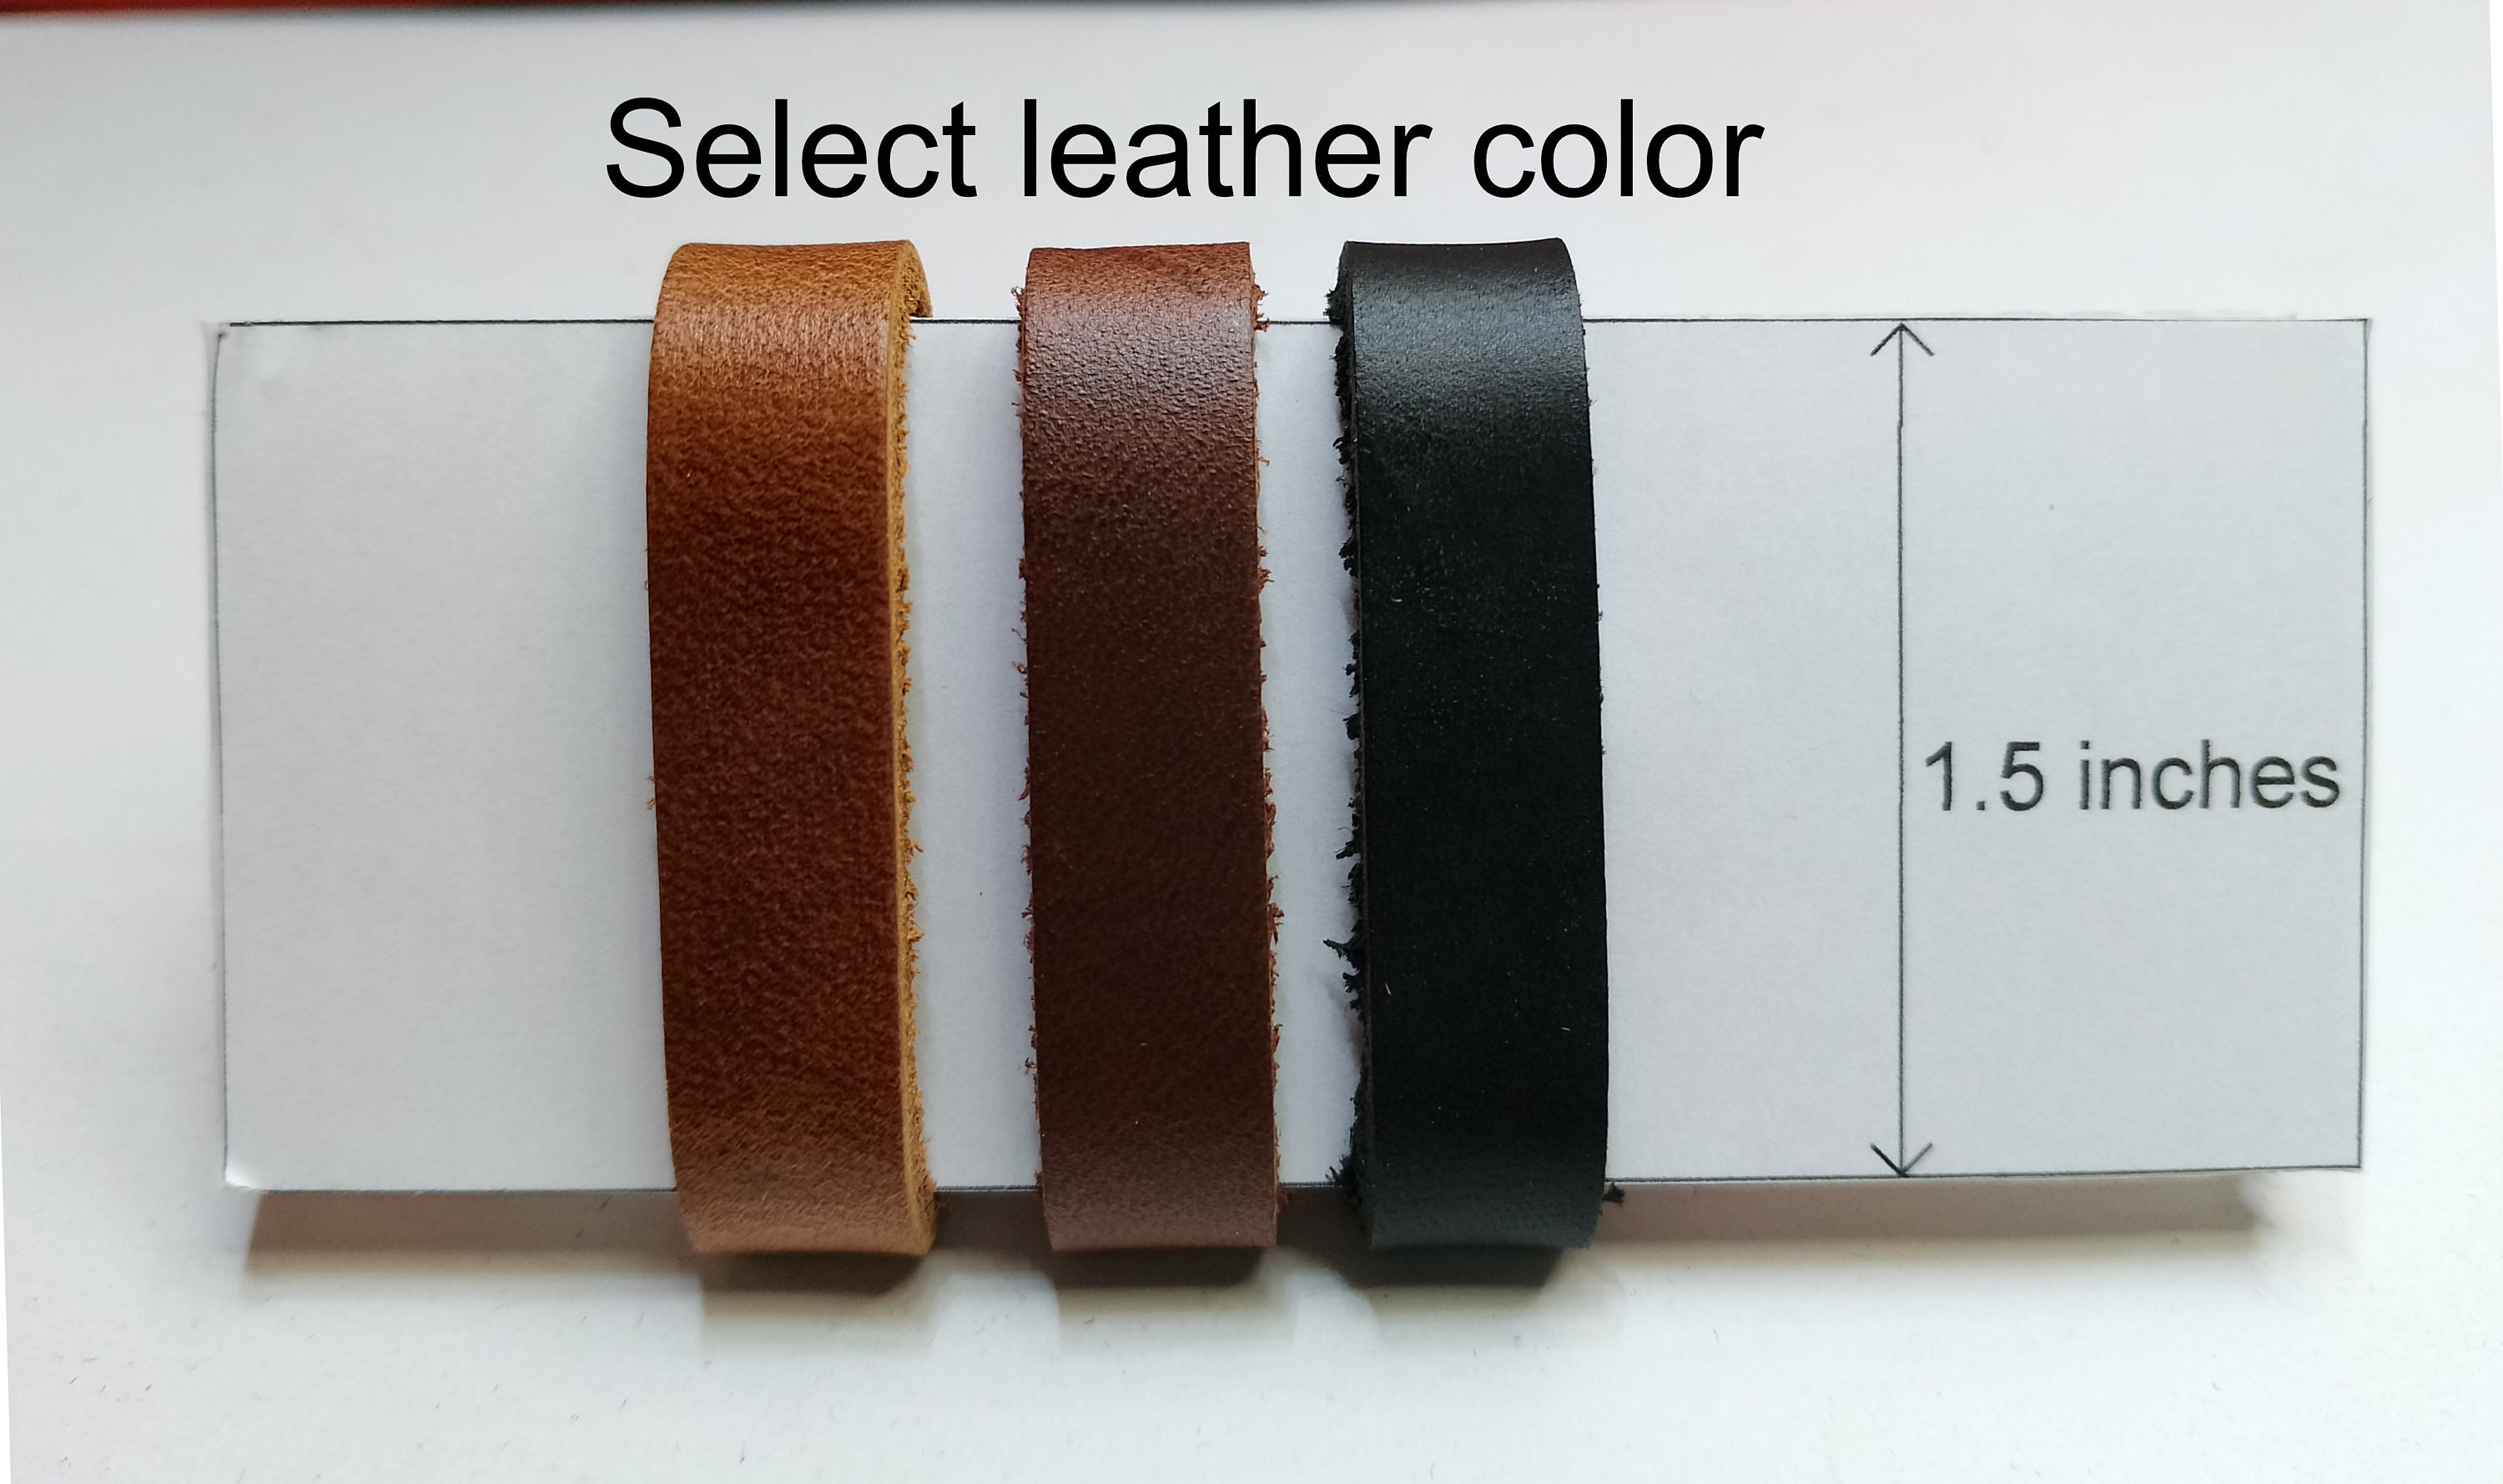  Style N Craft Men's for Waist Size 32-46 Leather Belt, Dark  Tan, 32-Inch-46-Inch (Measure Clothes) : Style N Craft: Tools & Home  Improvement